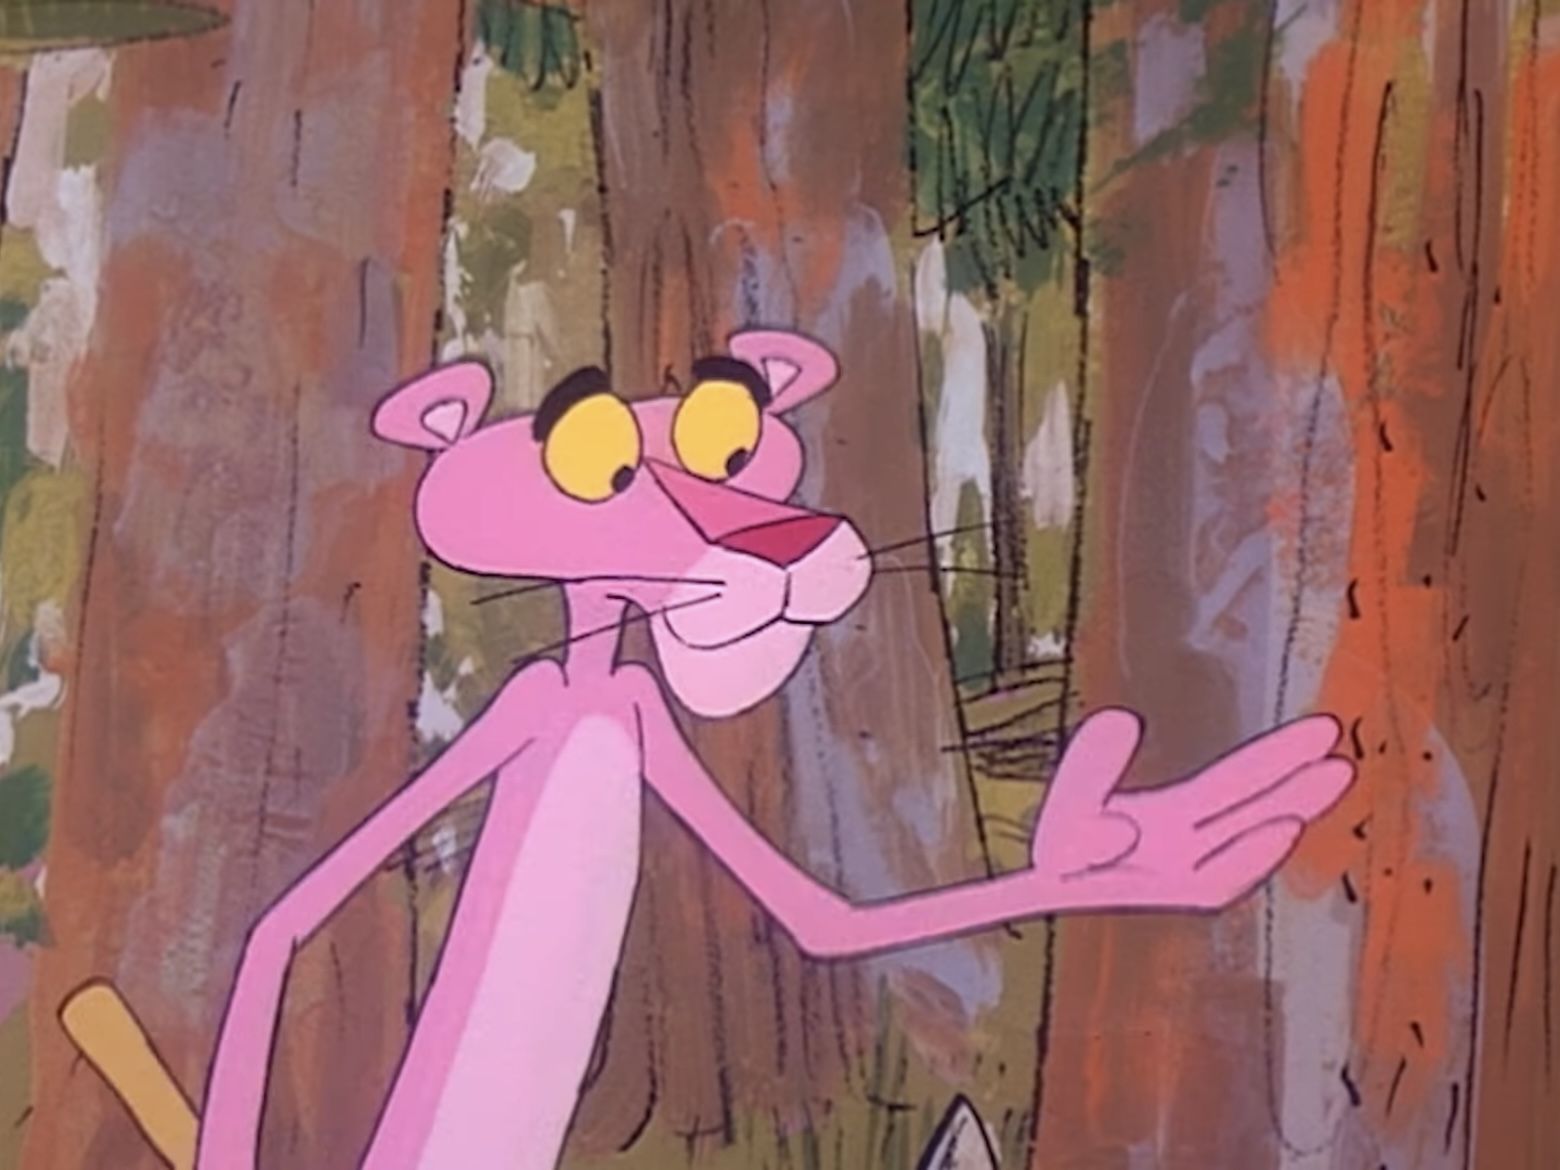 The Pink Panther in a forest, holding his paw out as if to shake. - Pink Panther